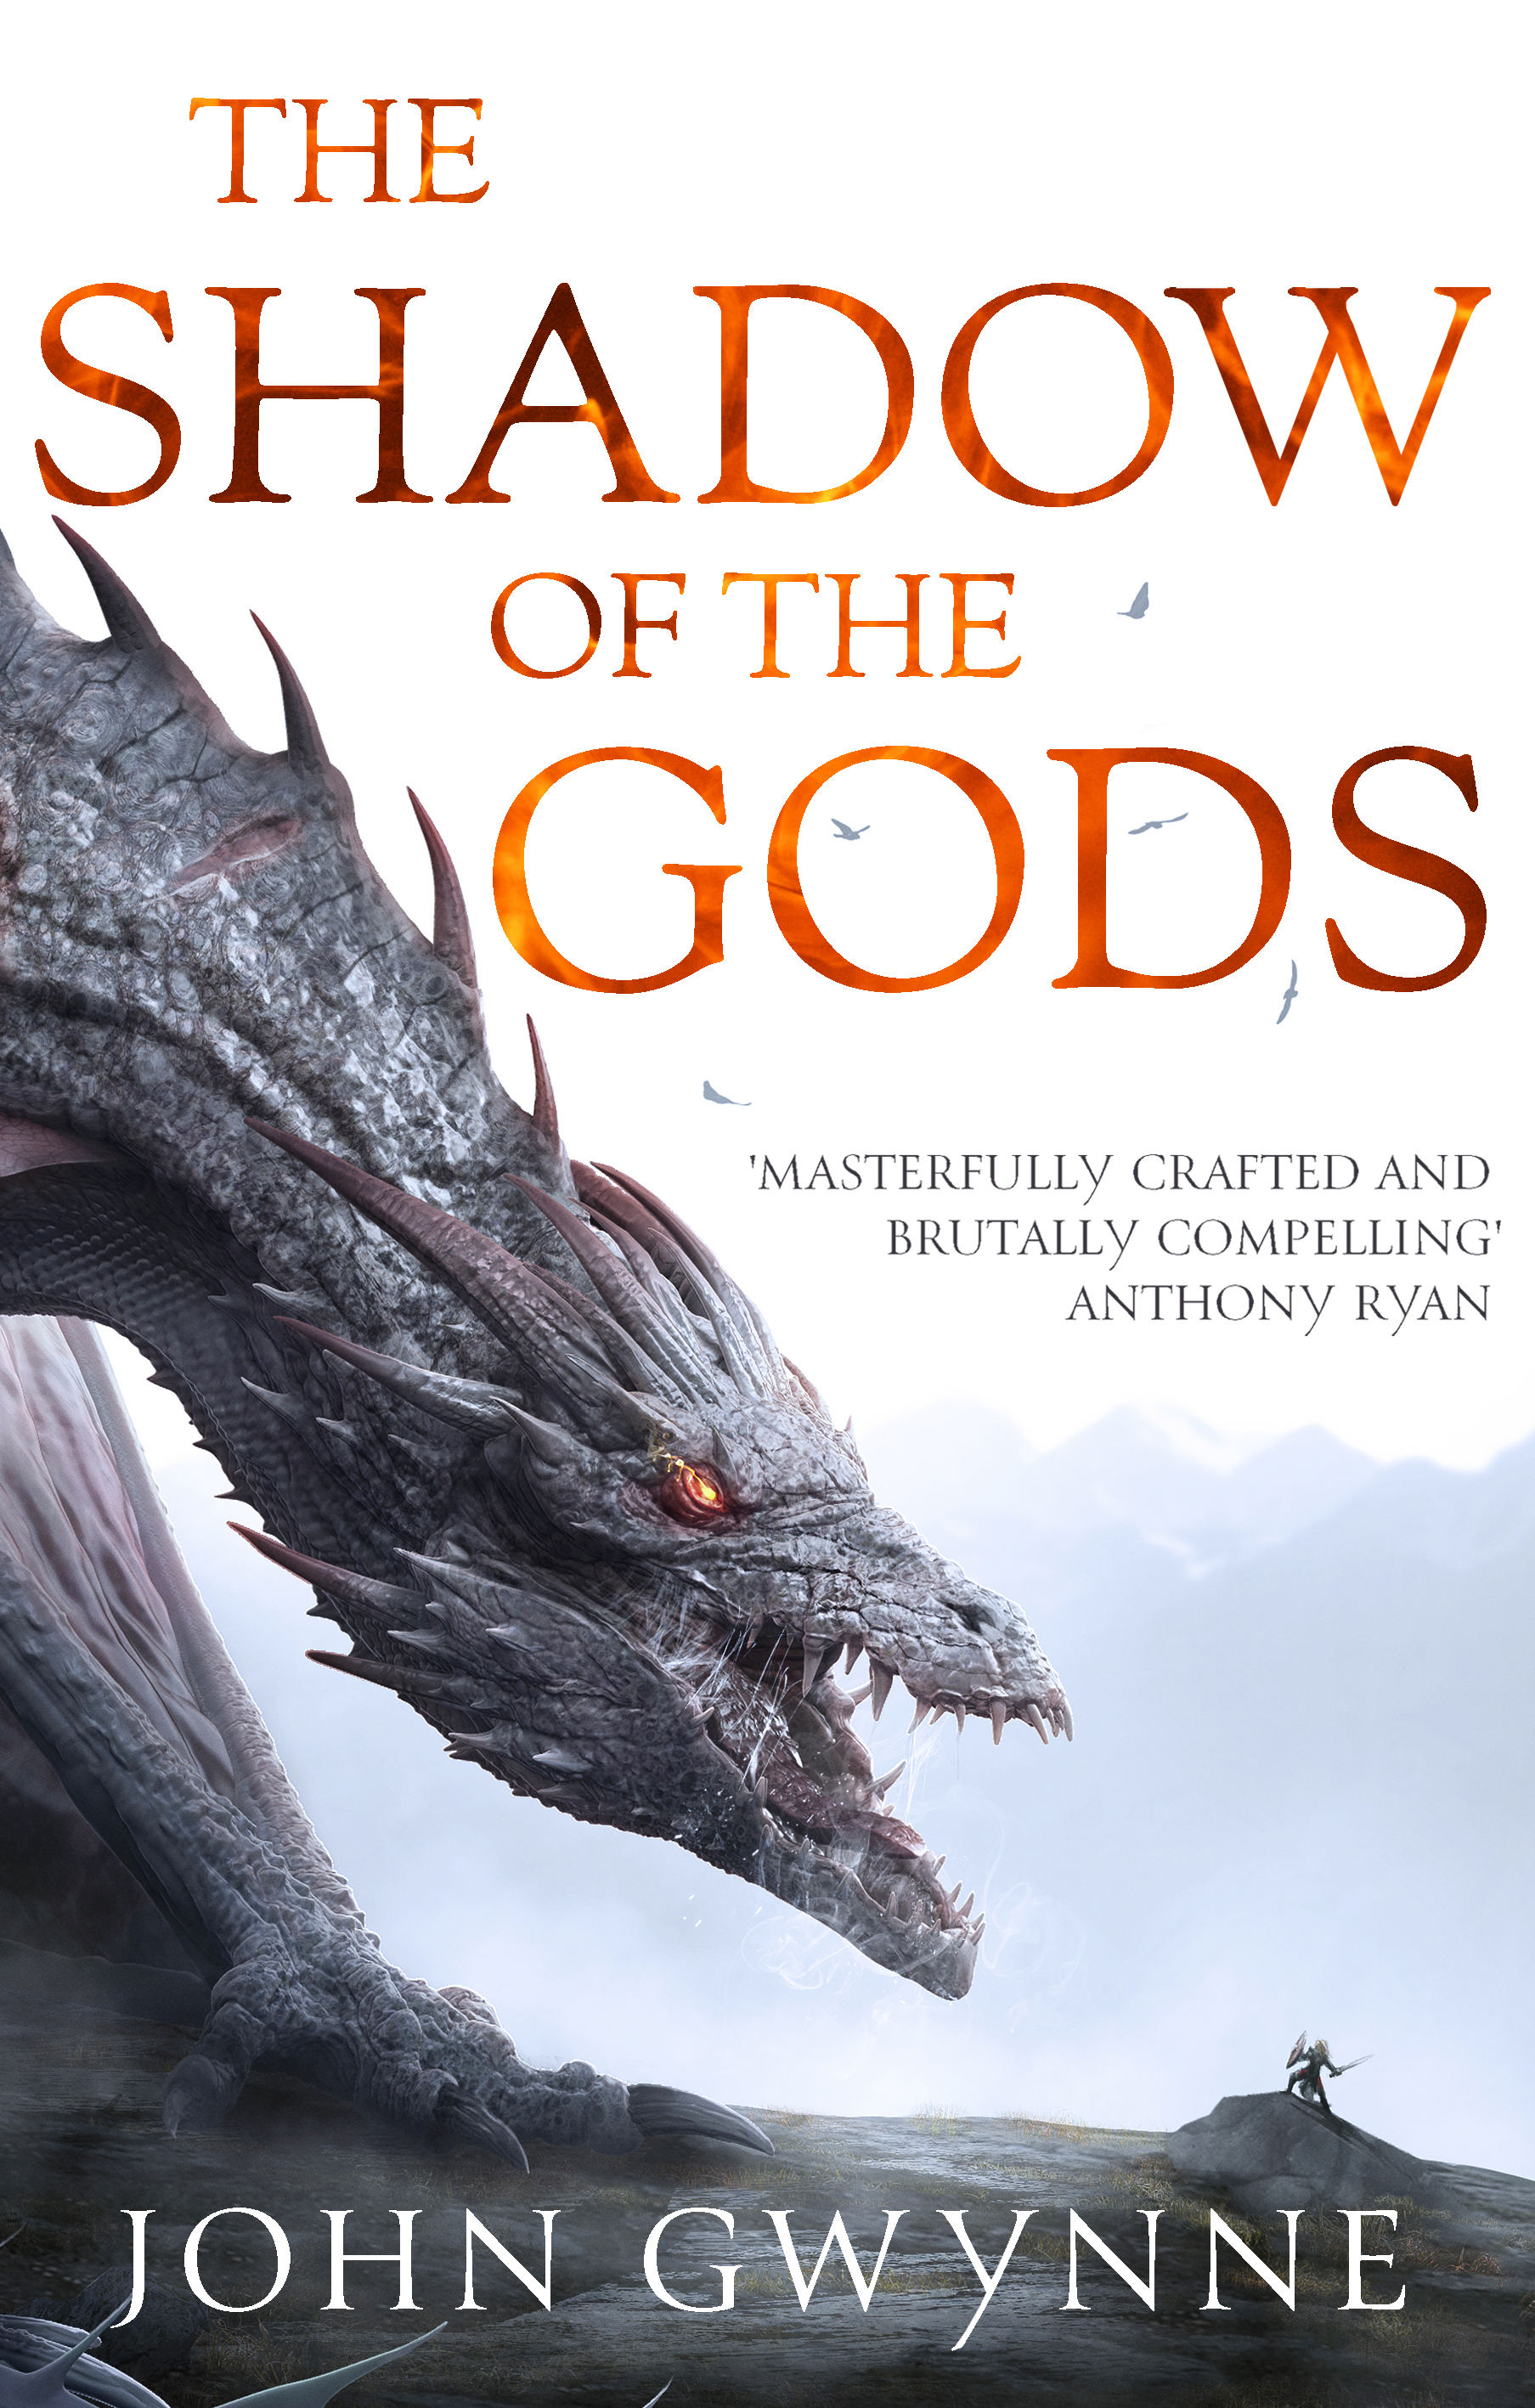 The Shadow of the Gods (Bloodsworn Saga #1) Free Download